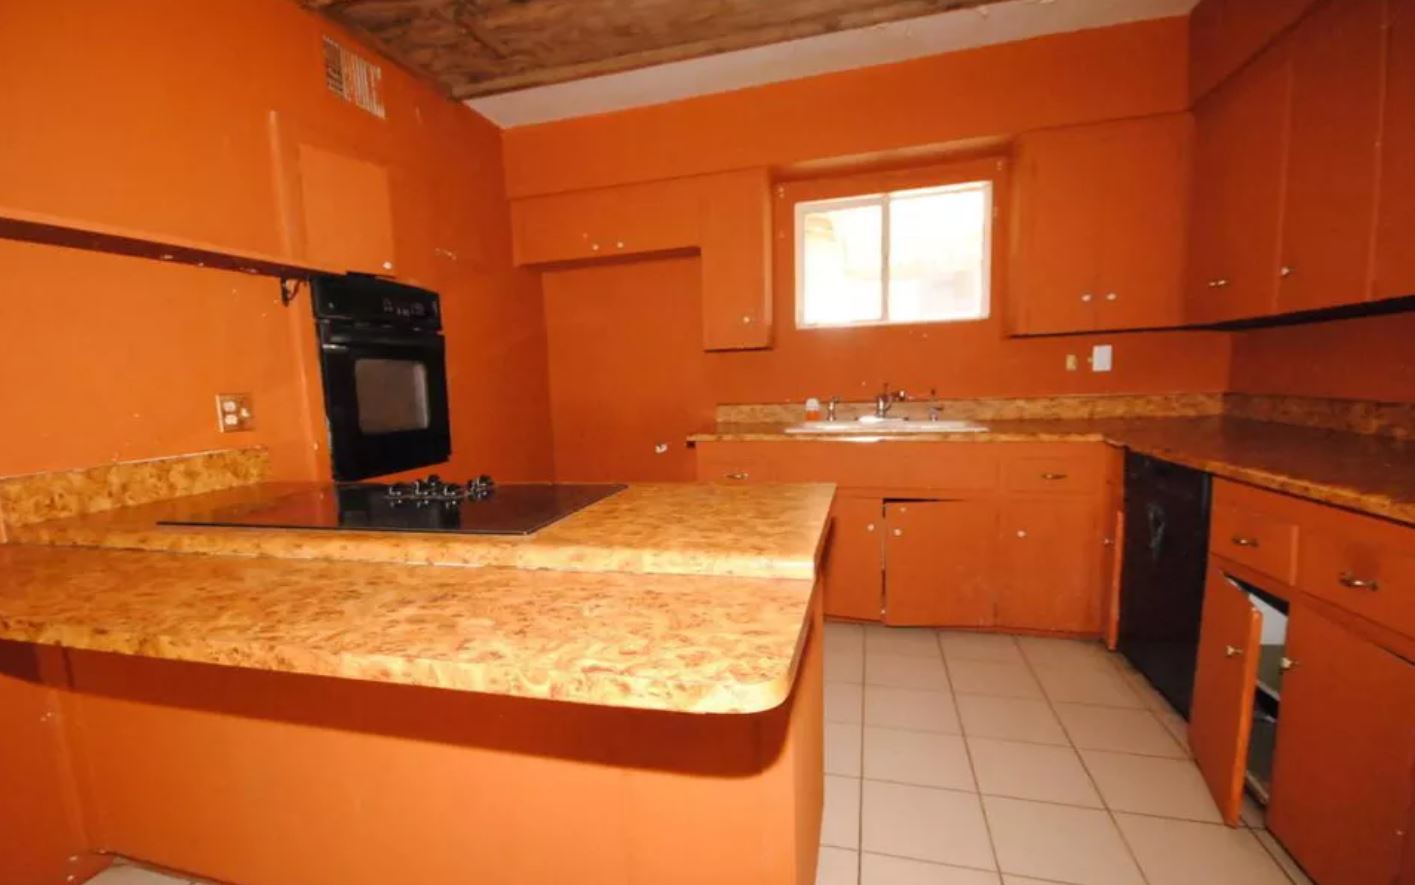 The Worst Kitchen  Designs That Will Make You Cringe 